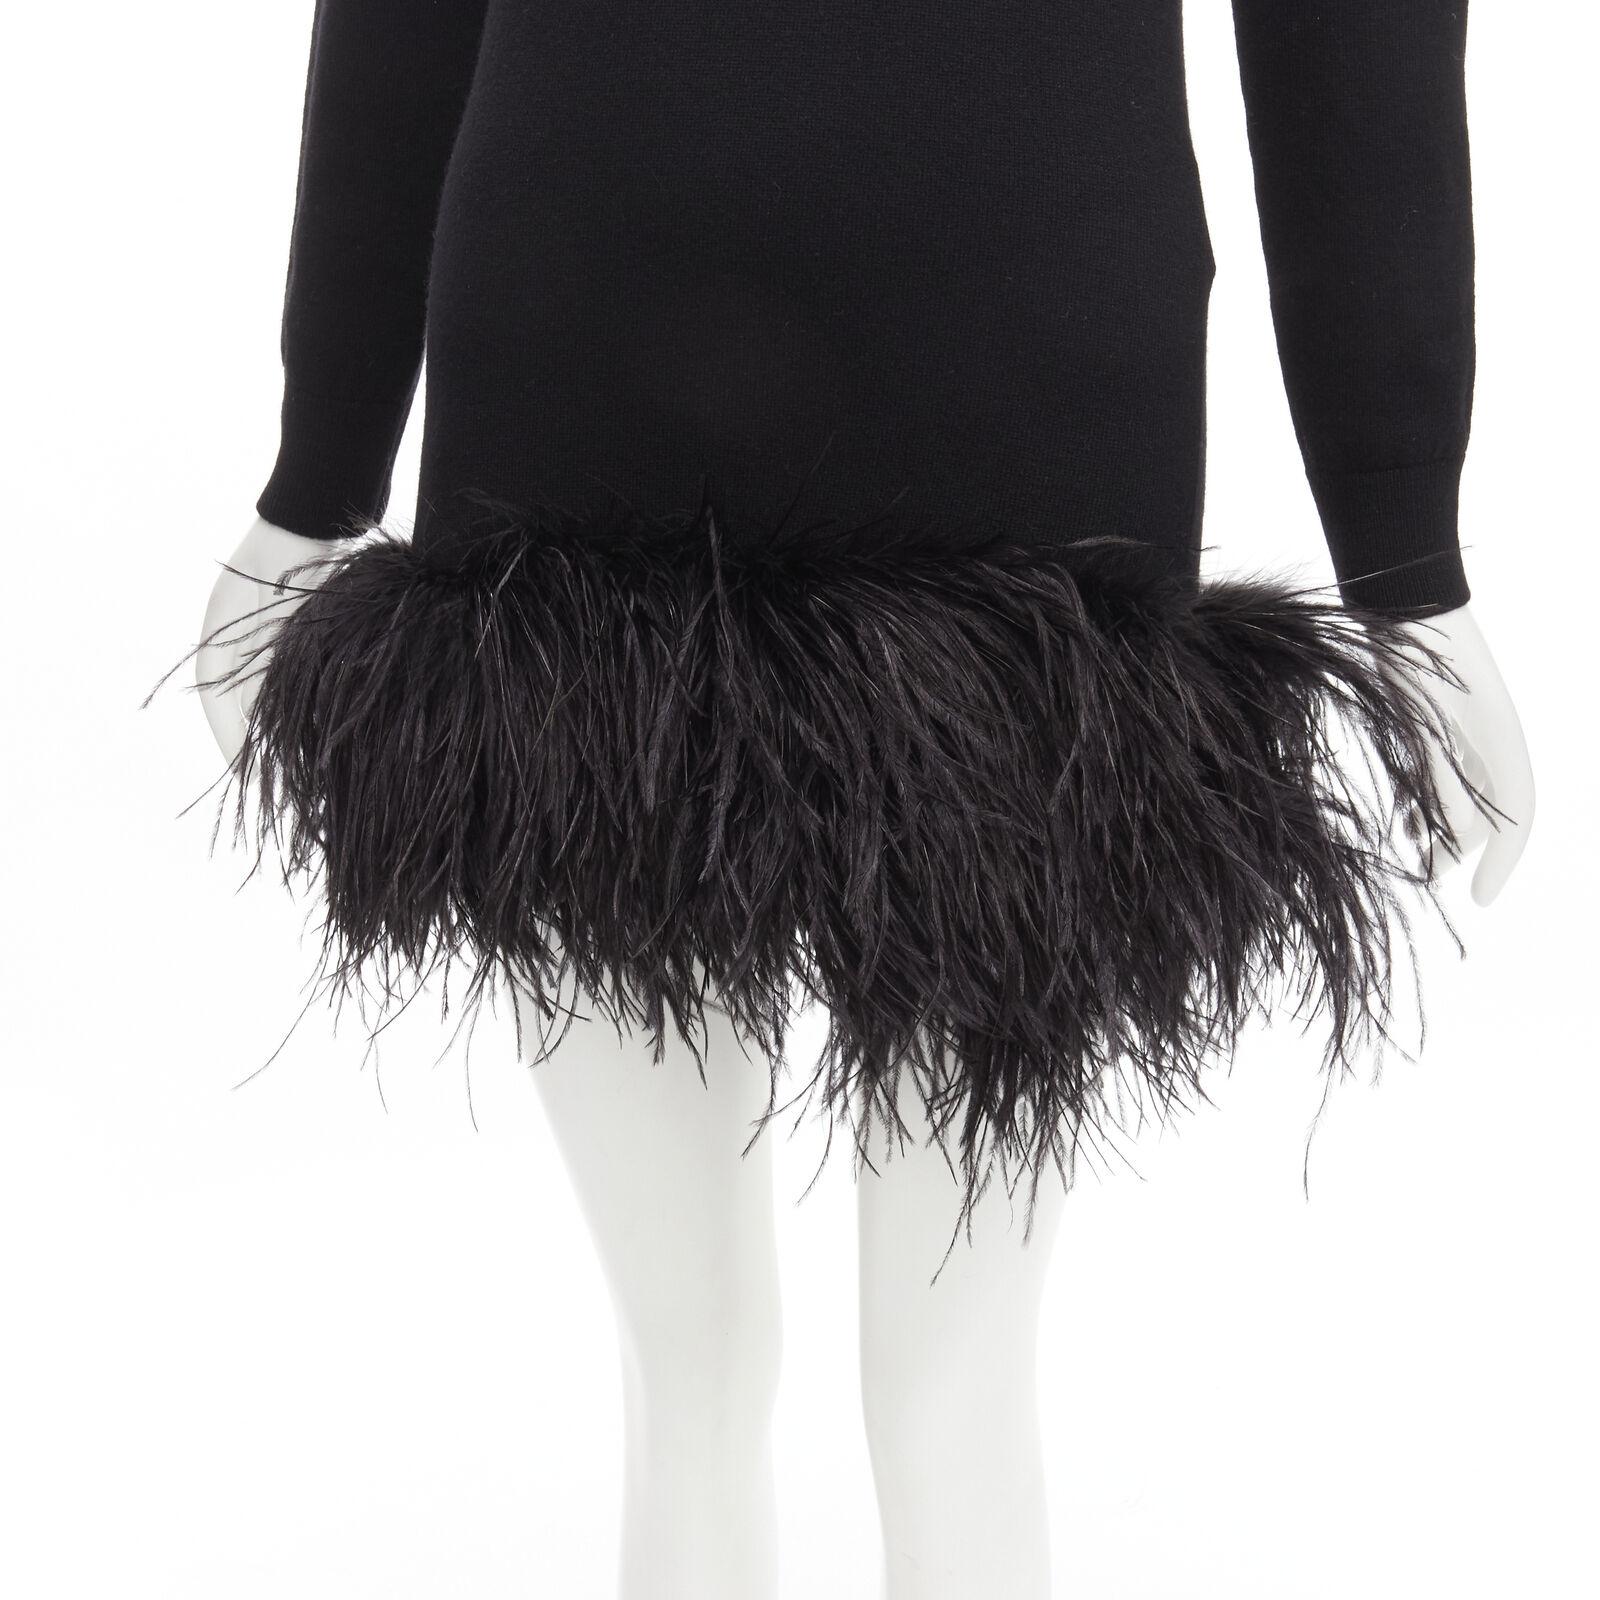 SAINT LAURENT 100% cashmere black ostrich feather trim mini sweater dress XS
Reference: AAWC/A00222
Brand: Saint Laurent
Designer: Anthony Vaccarello
Collection: 2020
Material: 100% Cashmere, Feather
Color: Black
Pattern: Solid
Extra Details: Black